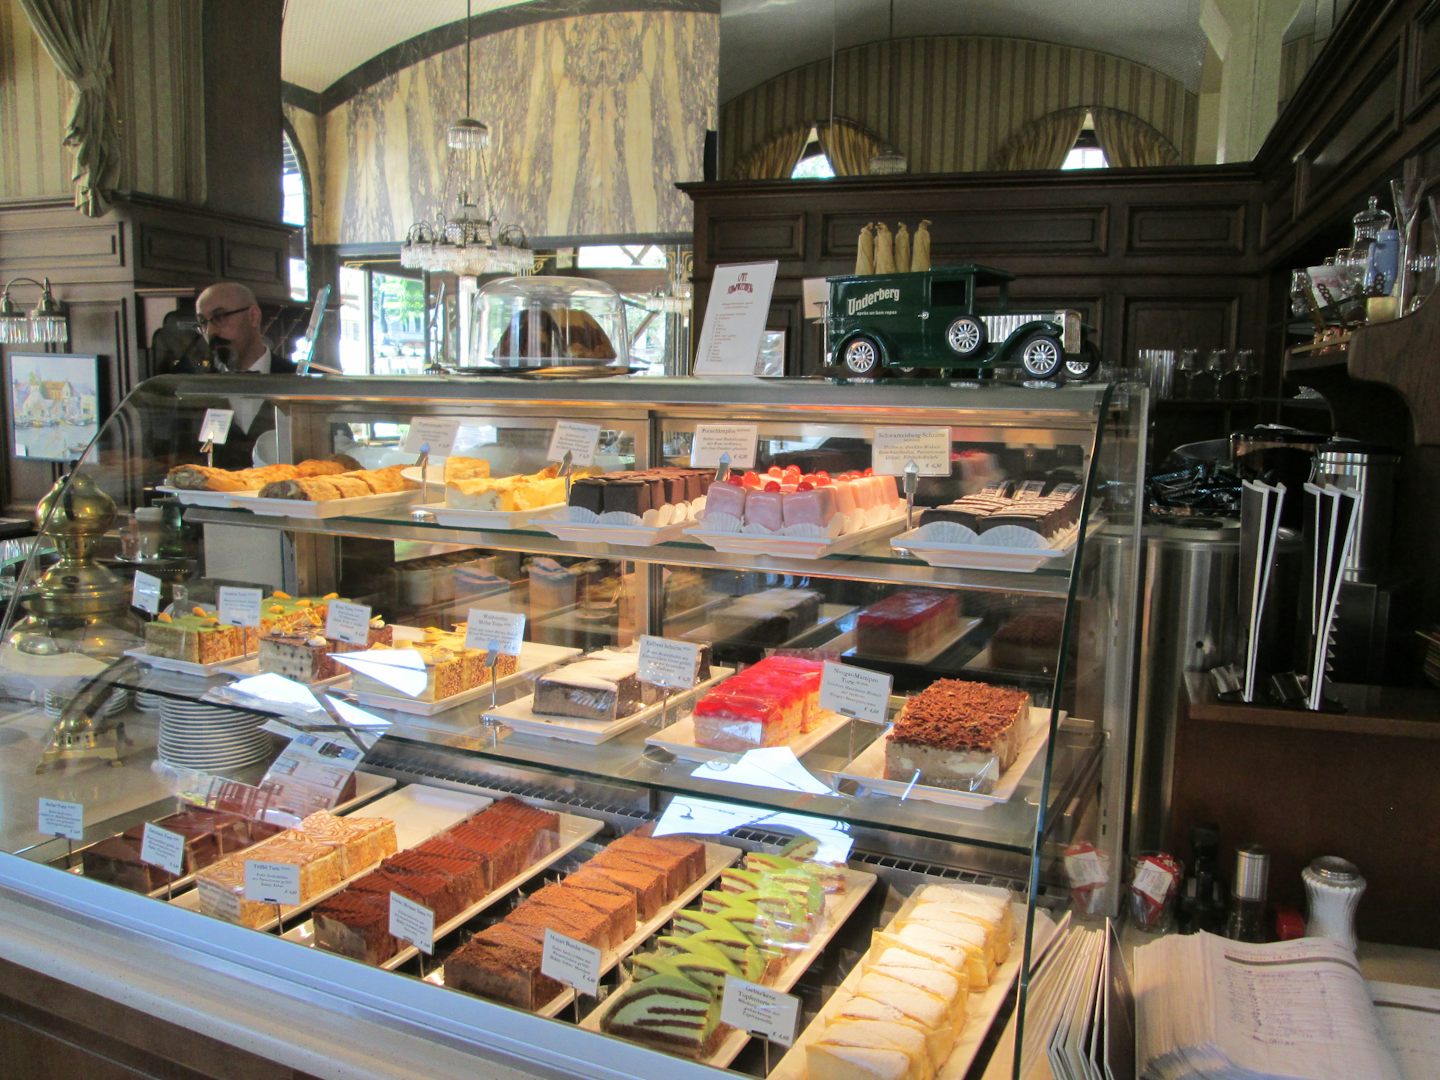 This is the sweets case at our favorite Coffe house in Vienna, the Cafe Sch